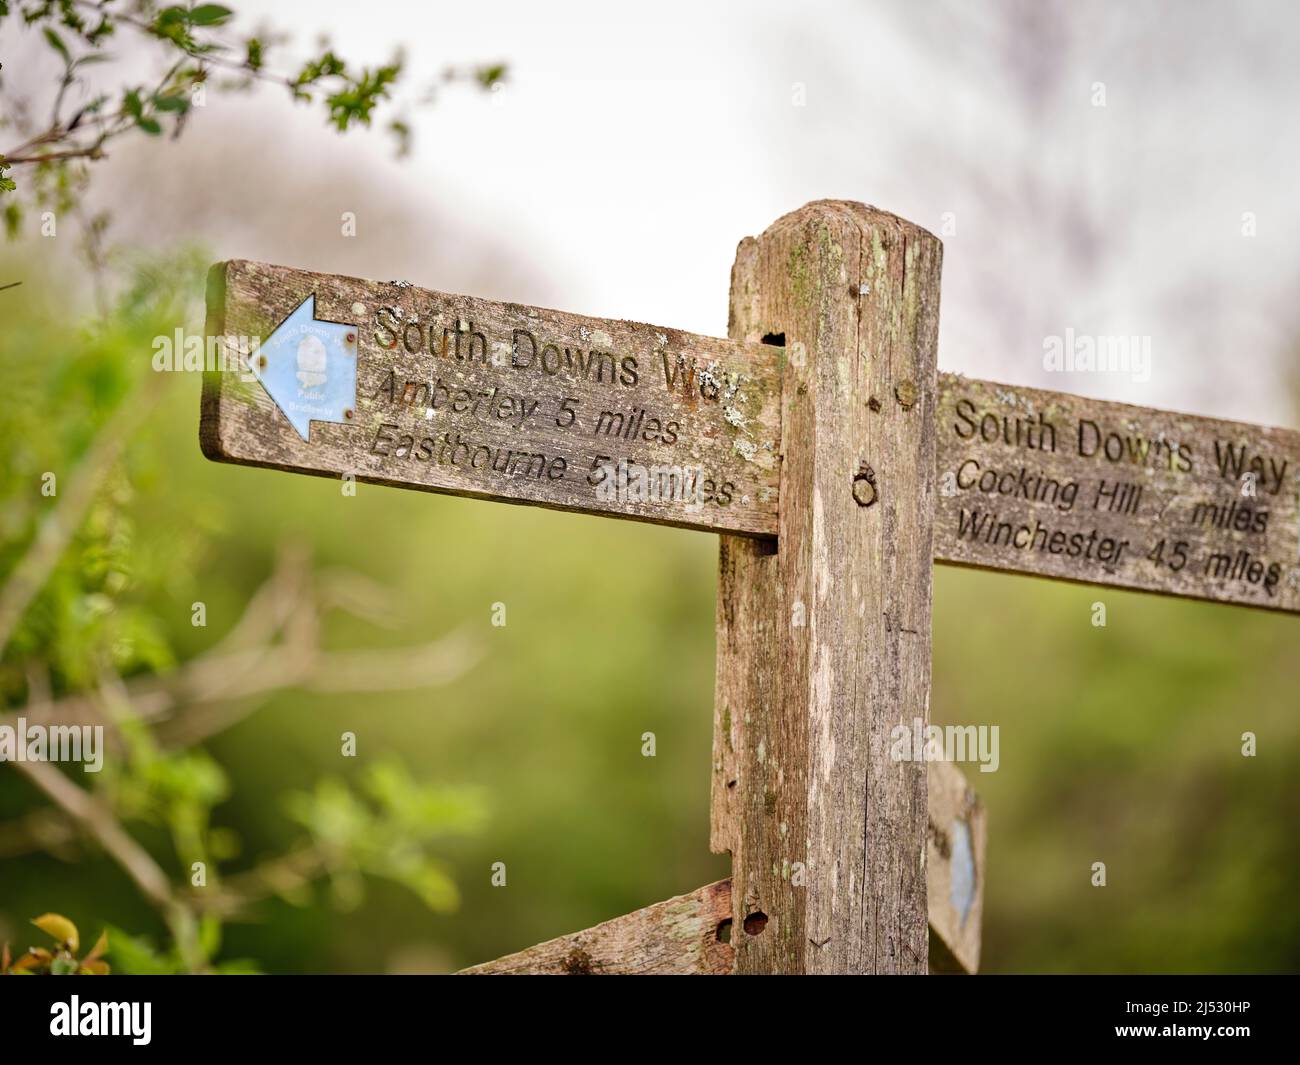 A signpost on The South Downs Way  at Bignor Hill in West Sussex. The sign shows distances to Eastbourne (55 miles) and Winchester (45 miles). Stock Photo